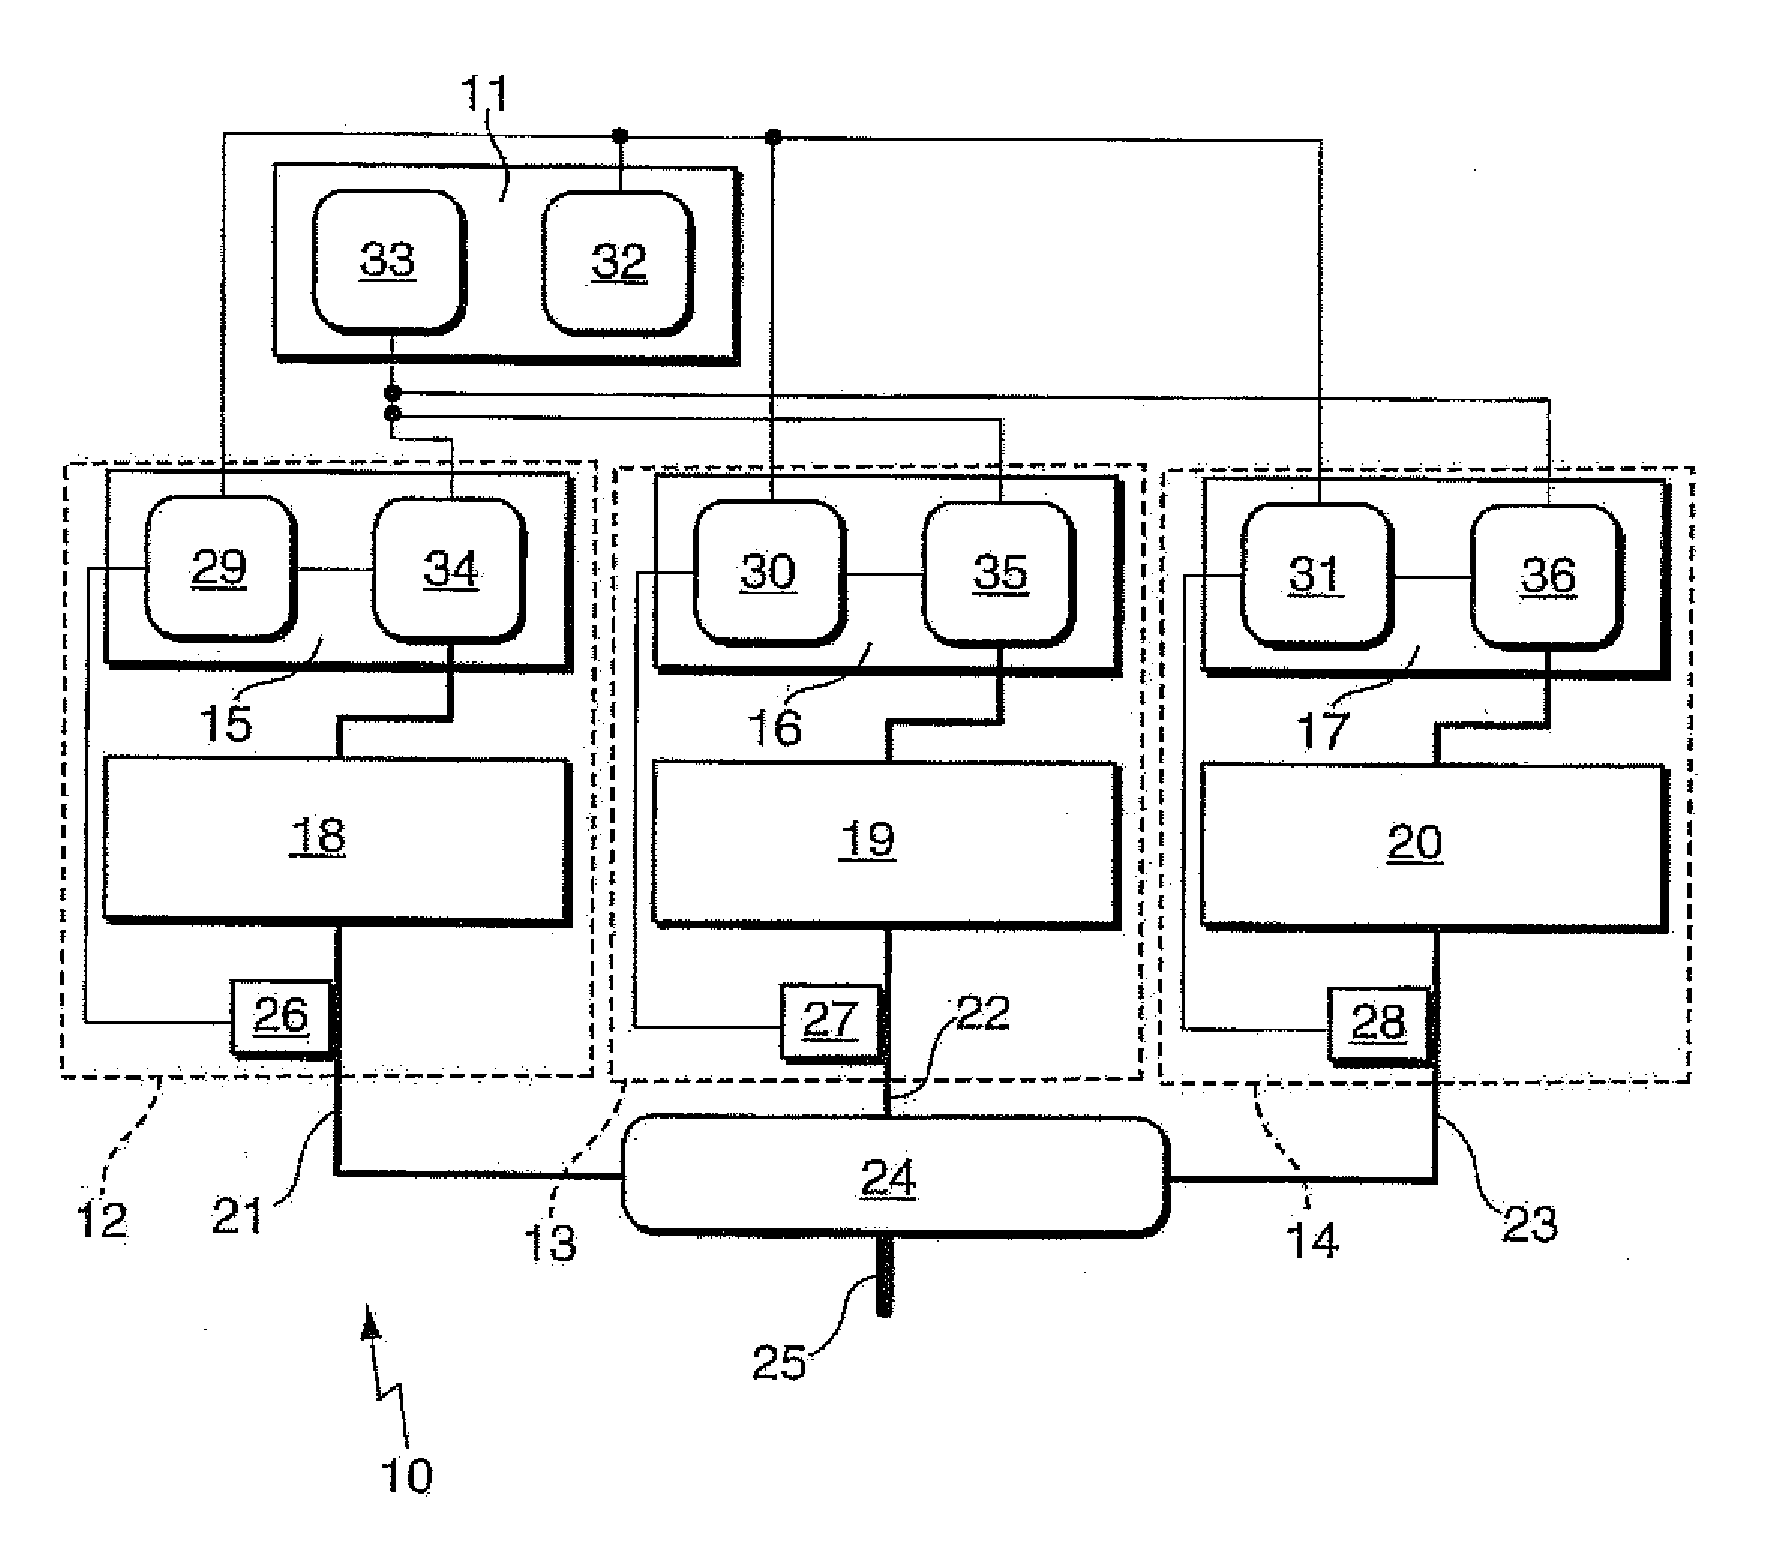 Phase balancing of high-frequency power generation units